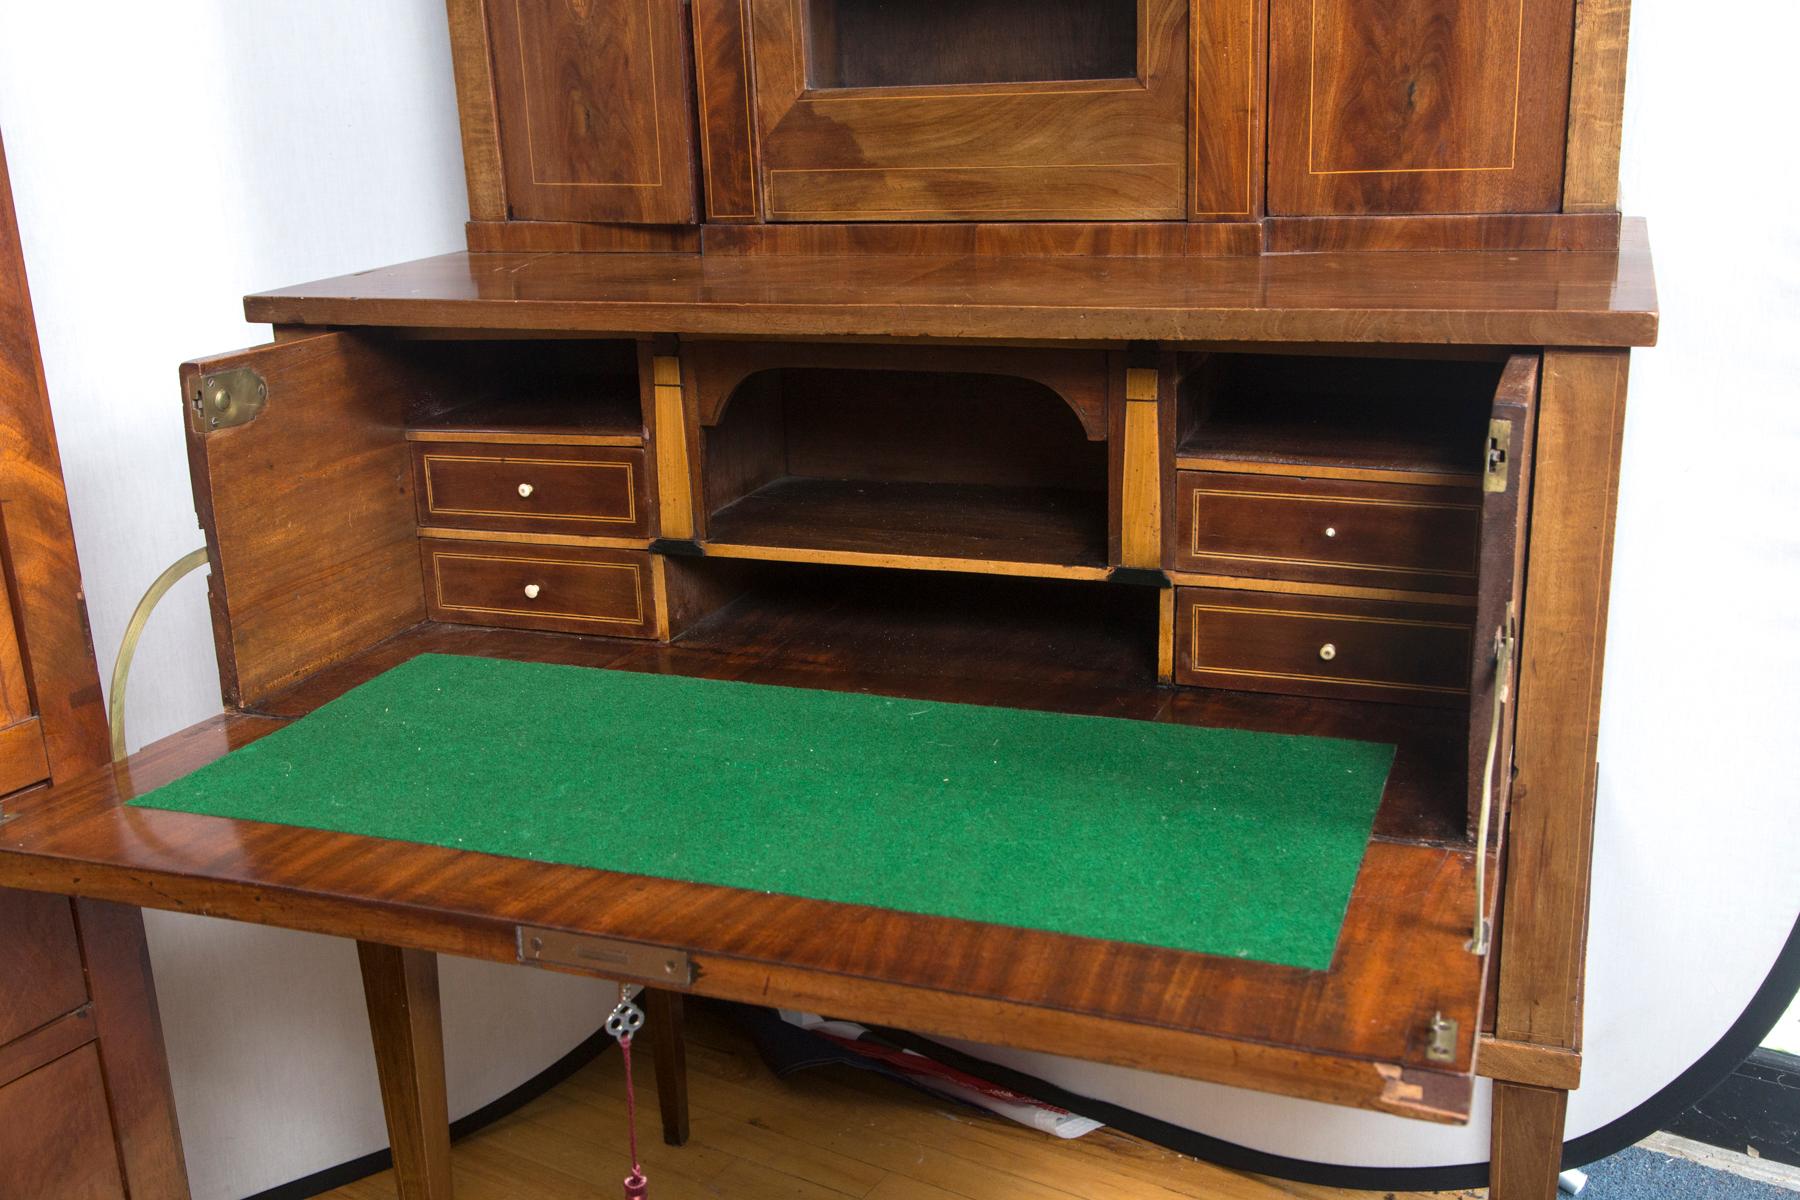 A lovely architectural form secretary with marquetry inlay doors.